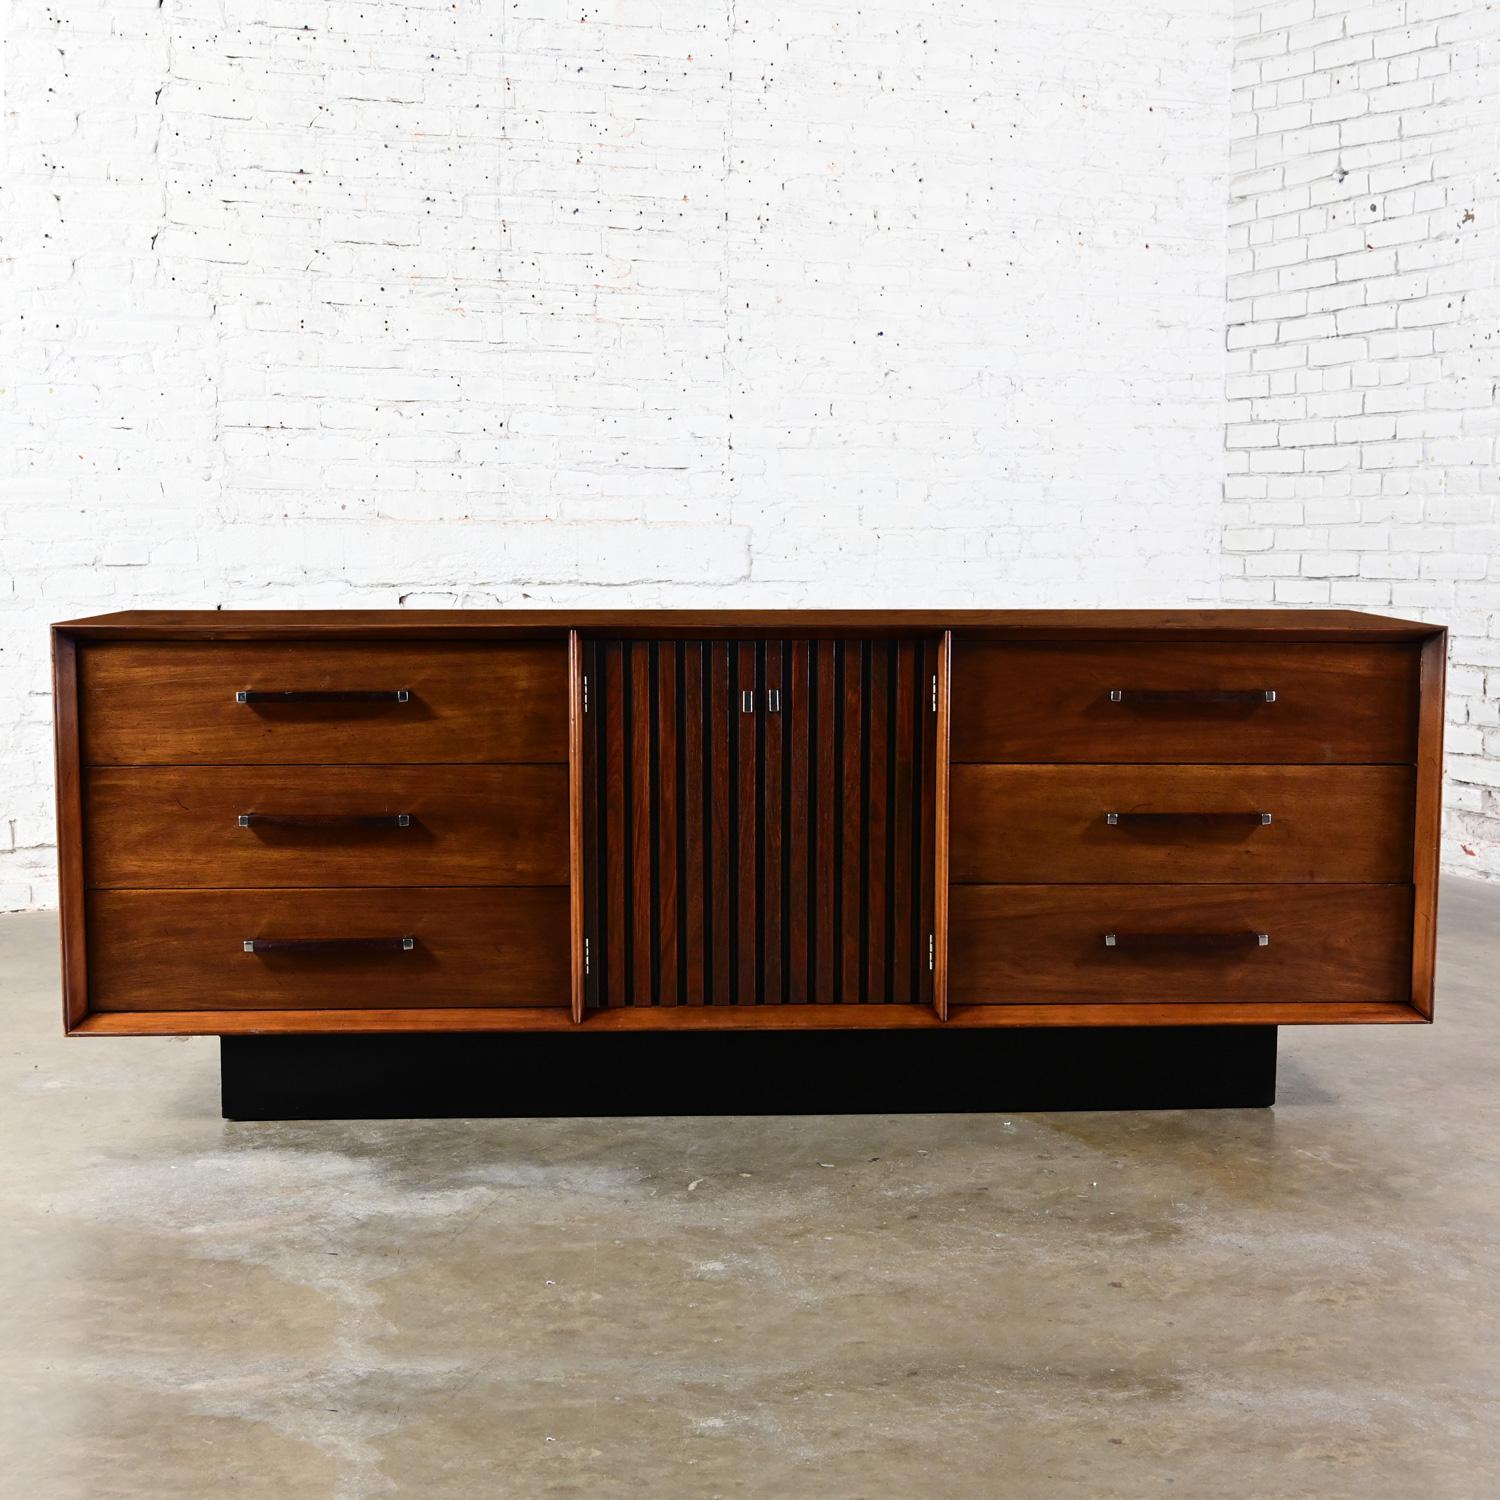 1971 MCM Lane Dresser Credenza Buffet Tower Suite Collection Walnut & Rosewood For Sale 5